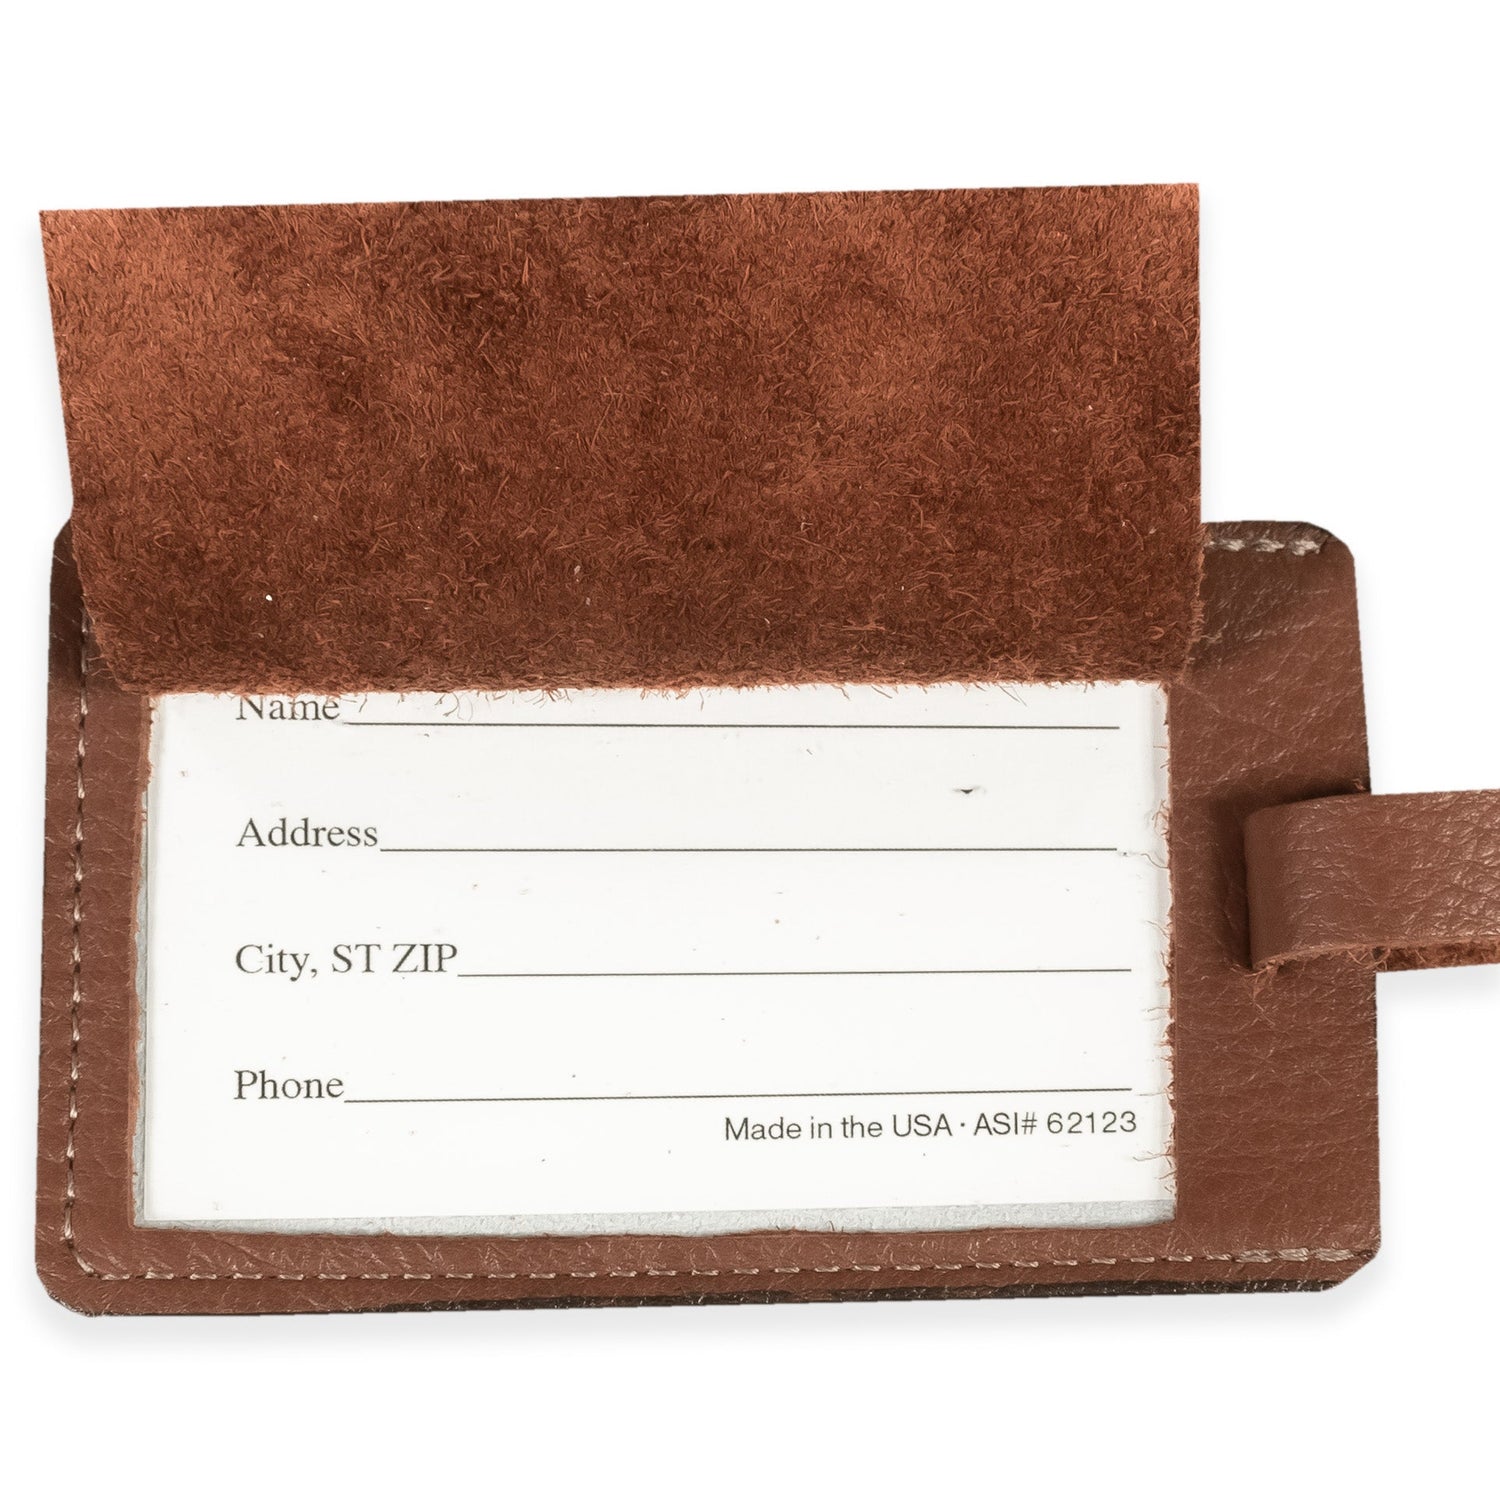 Texas A&M Reveille Leather Luggage Tag